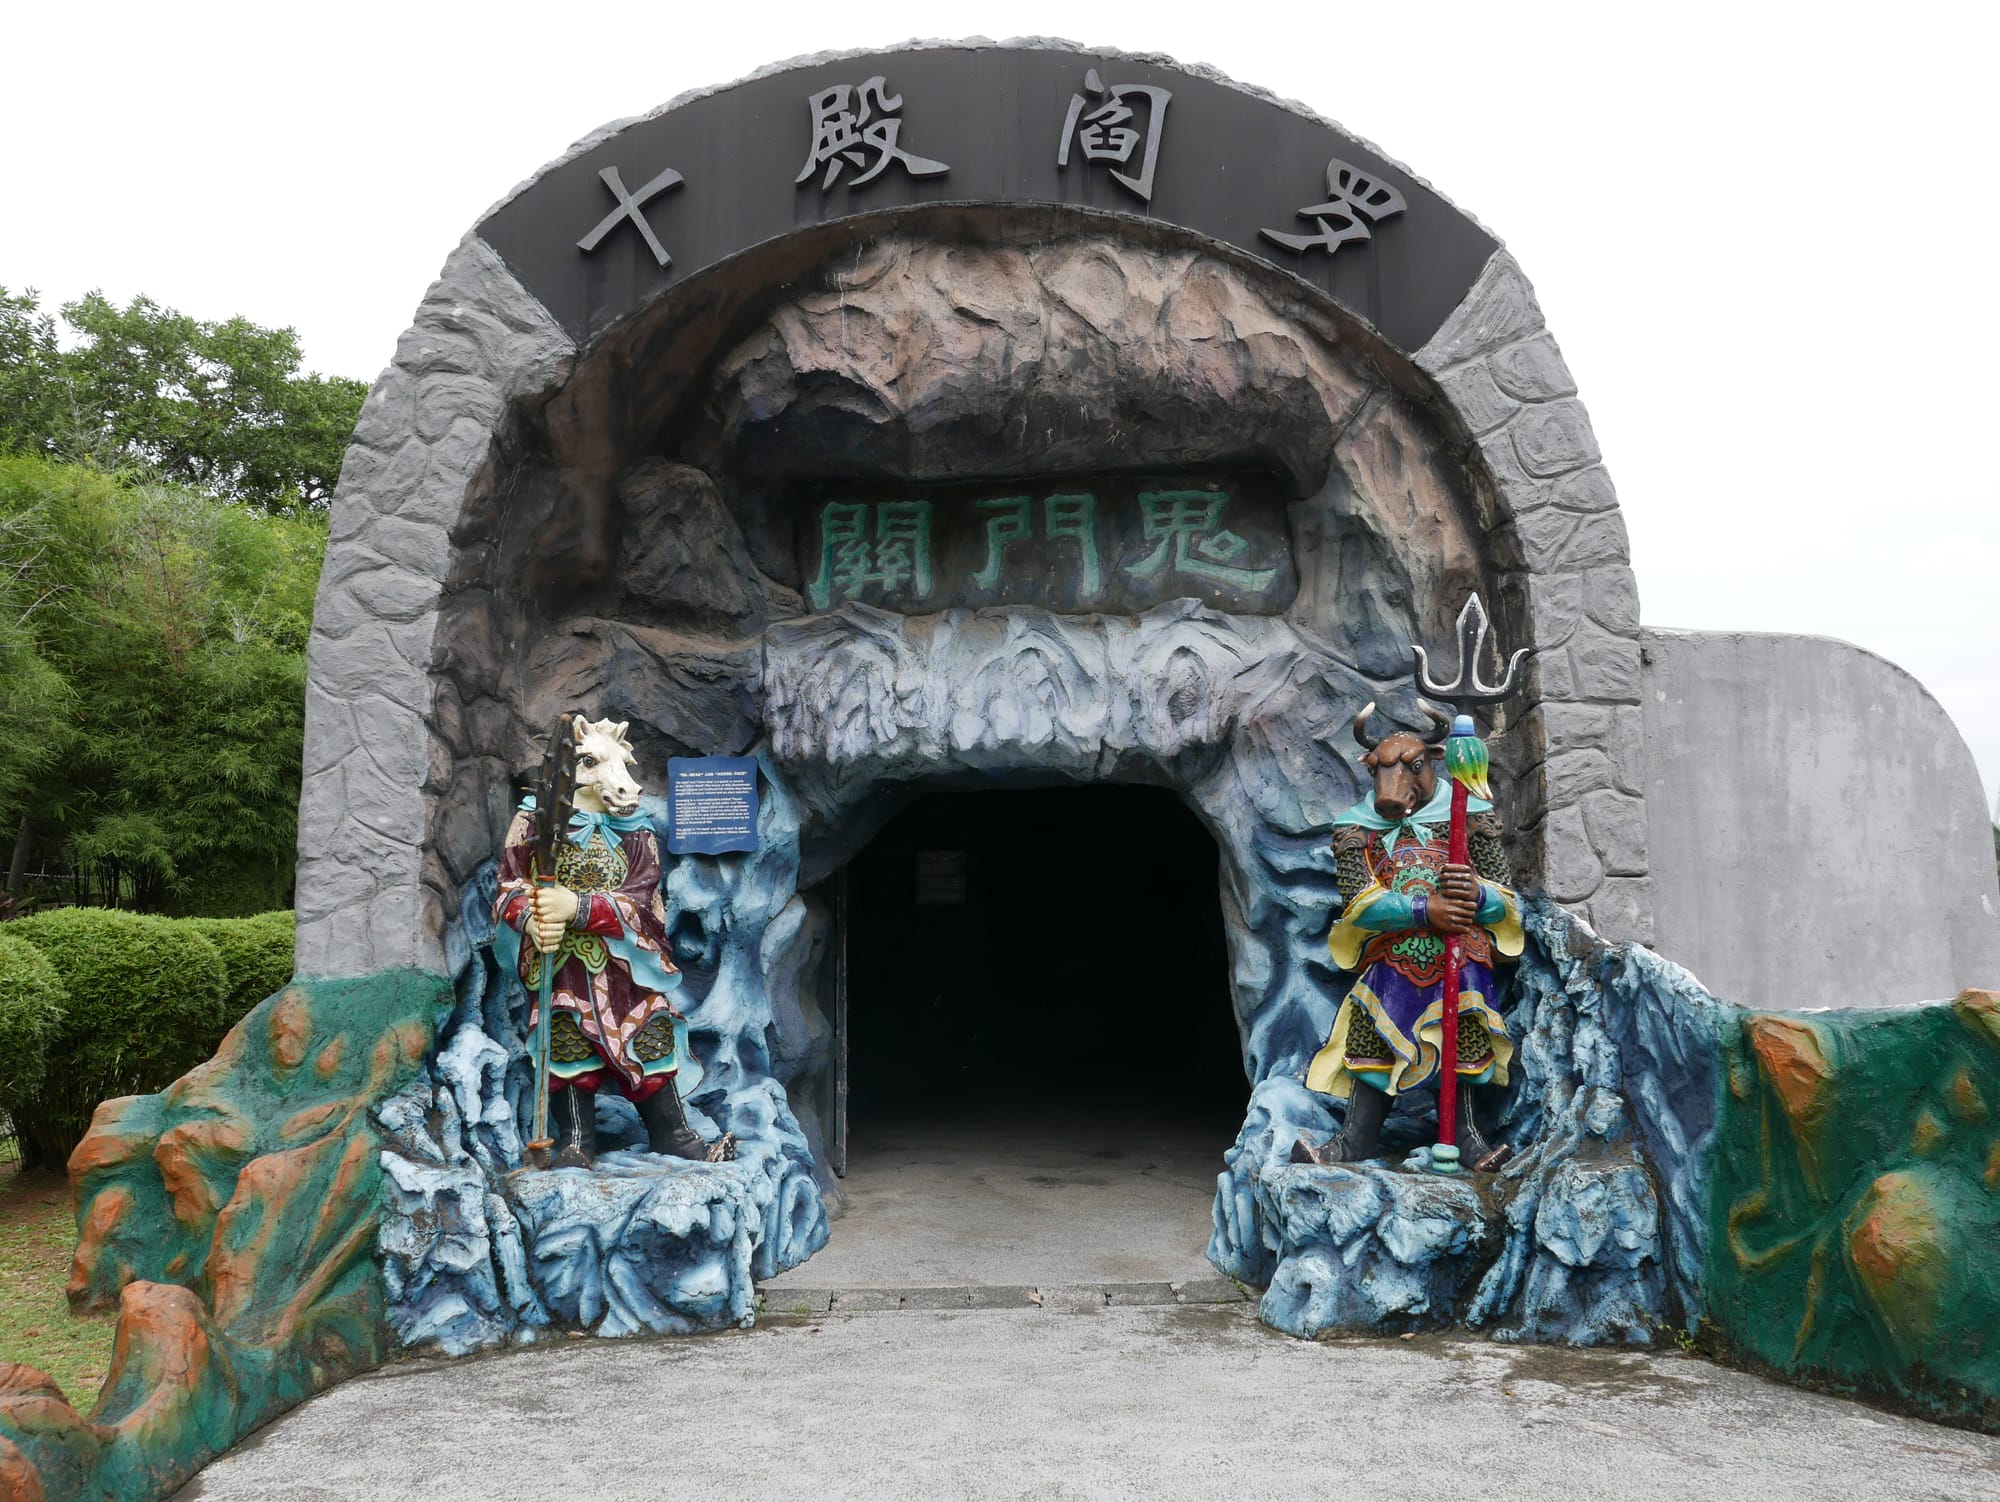 Photo by Author — Ox-Head and Horse-Face guarding the entrance to hell — 10 Courts of Hell, Haw Par Villa, Singapore